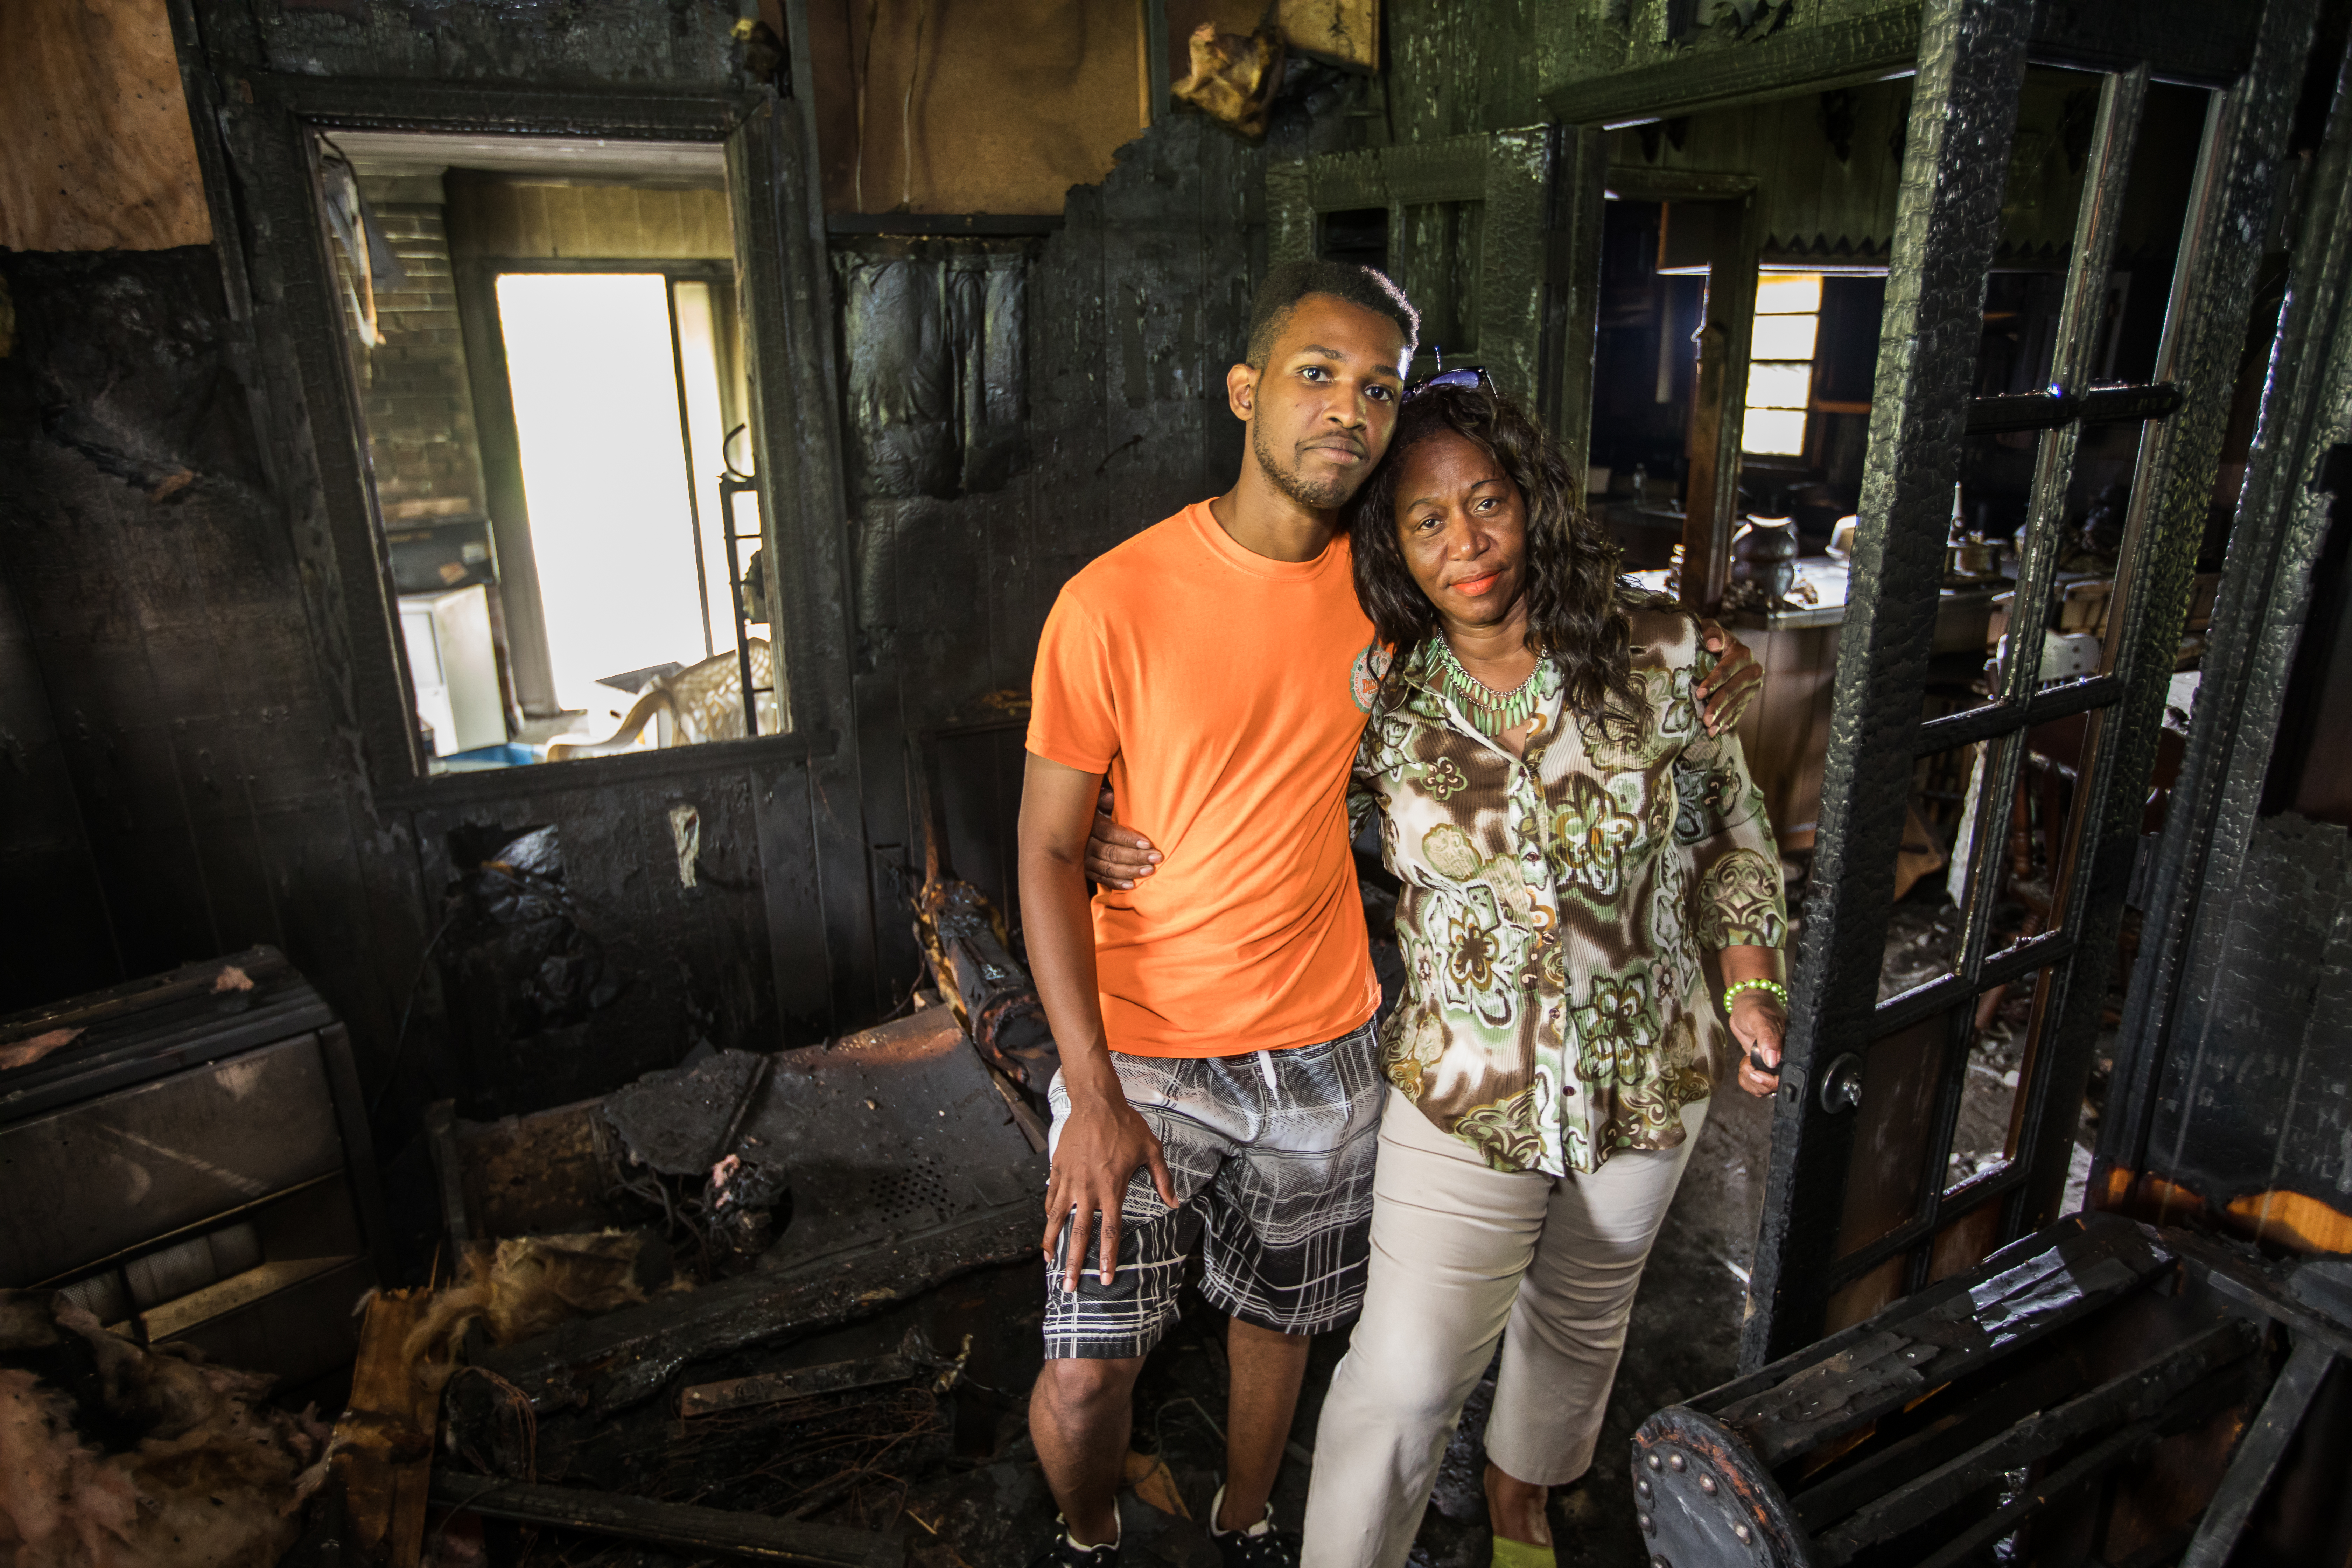 A mom and her son standing in their burned house after a home fire.